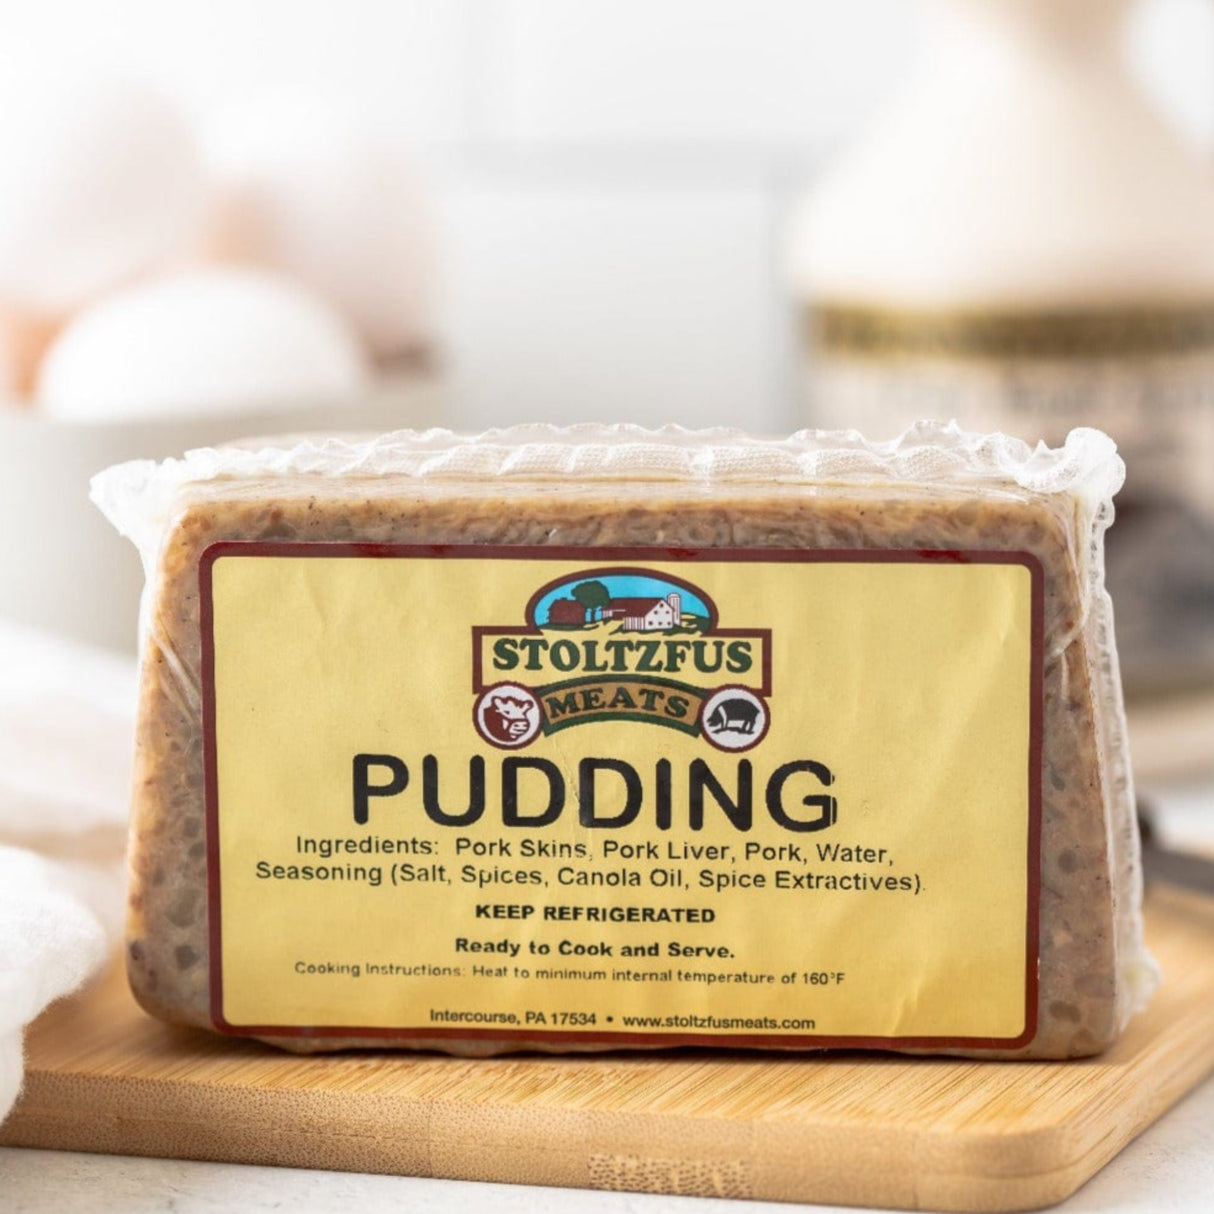 a package of pudding on a cutting board